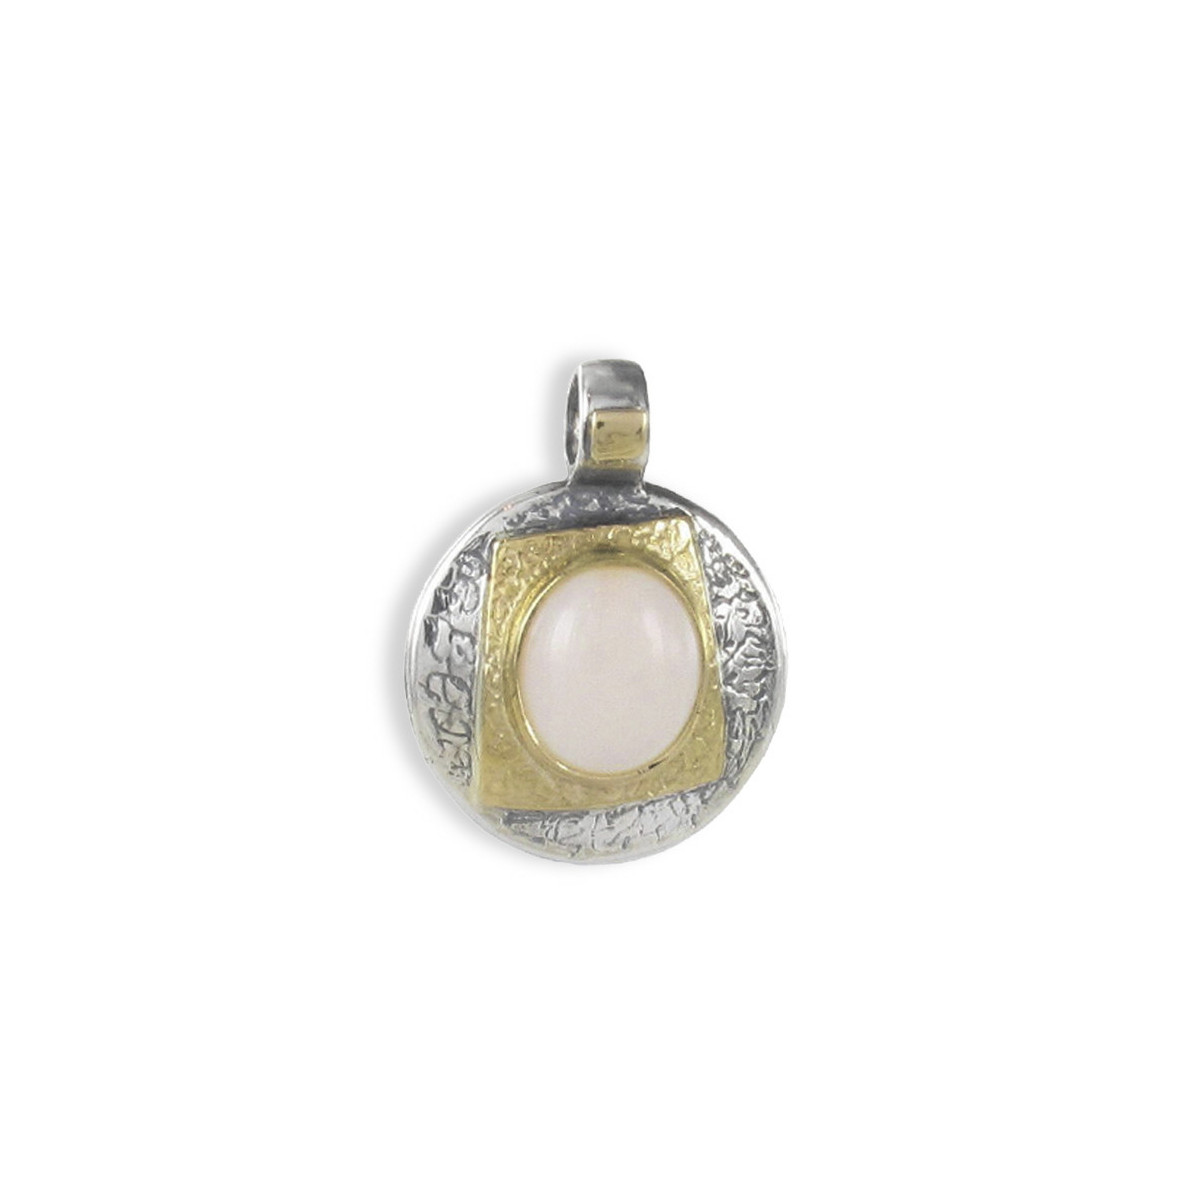 PENDANT SILVER AND GOLD WITH CORAL